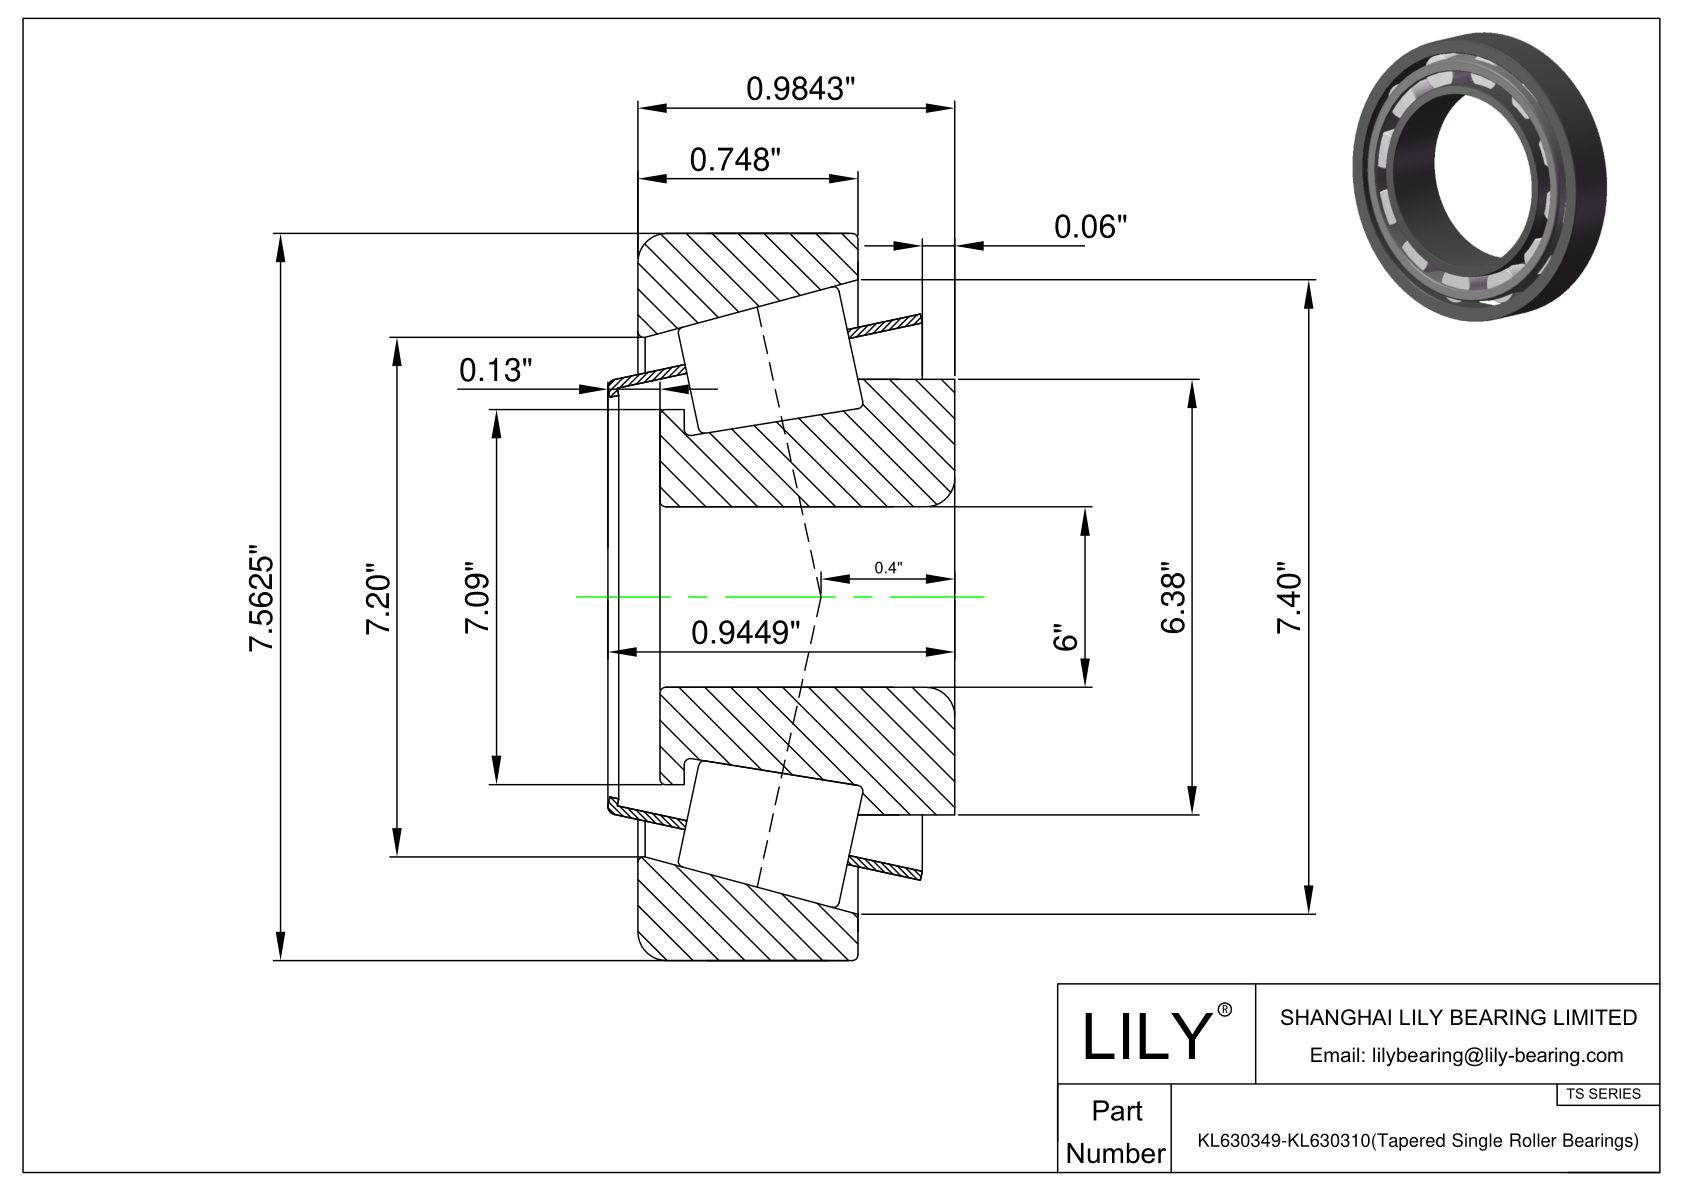 KL630349-KL630310 TS (Tapered Single Roller Bearings) (Imperial) cad drawing